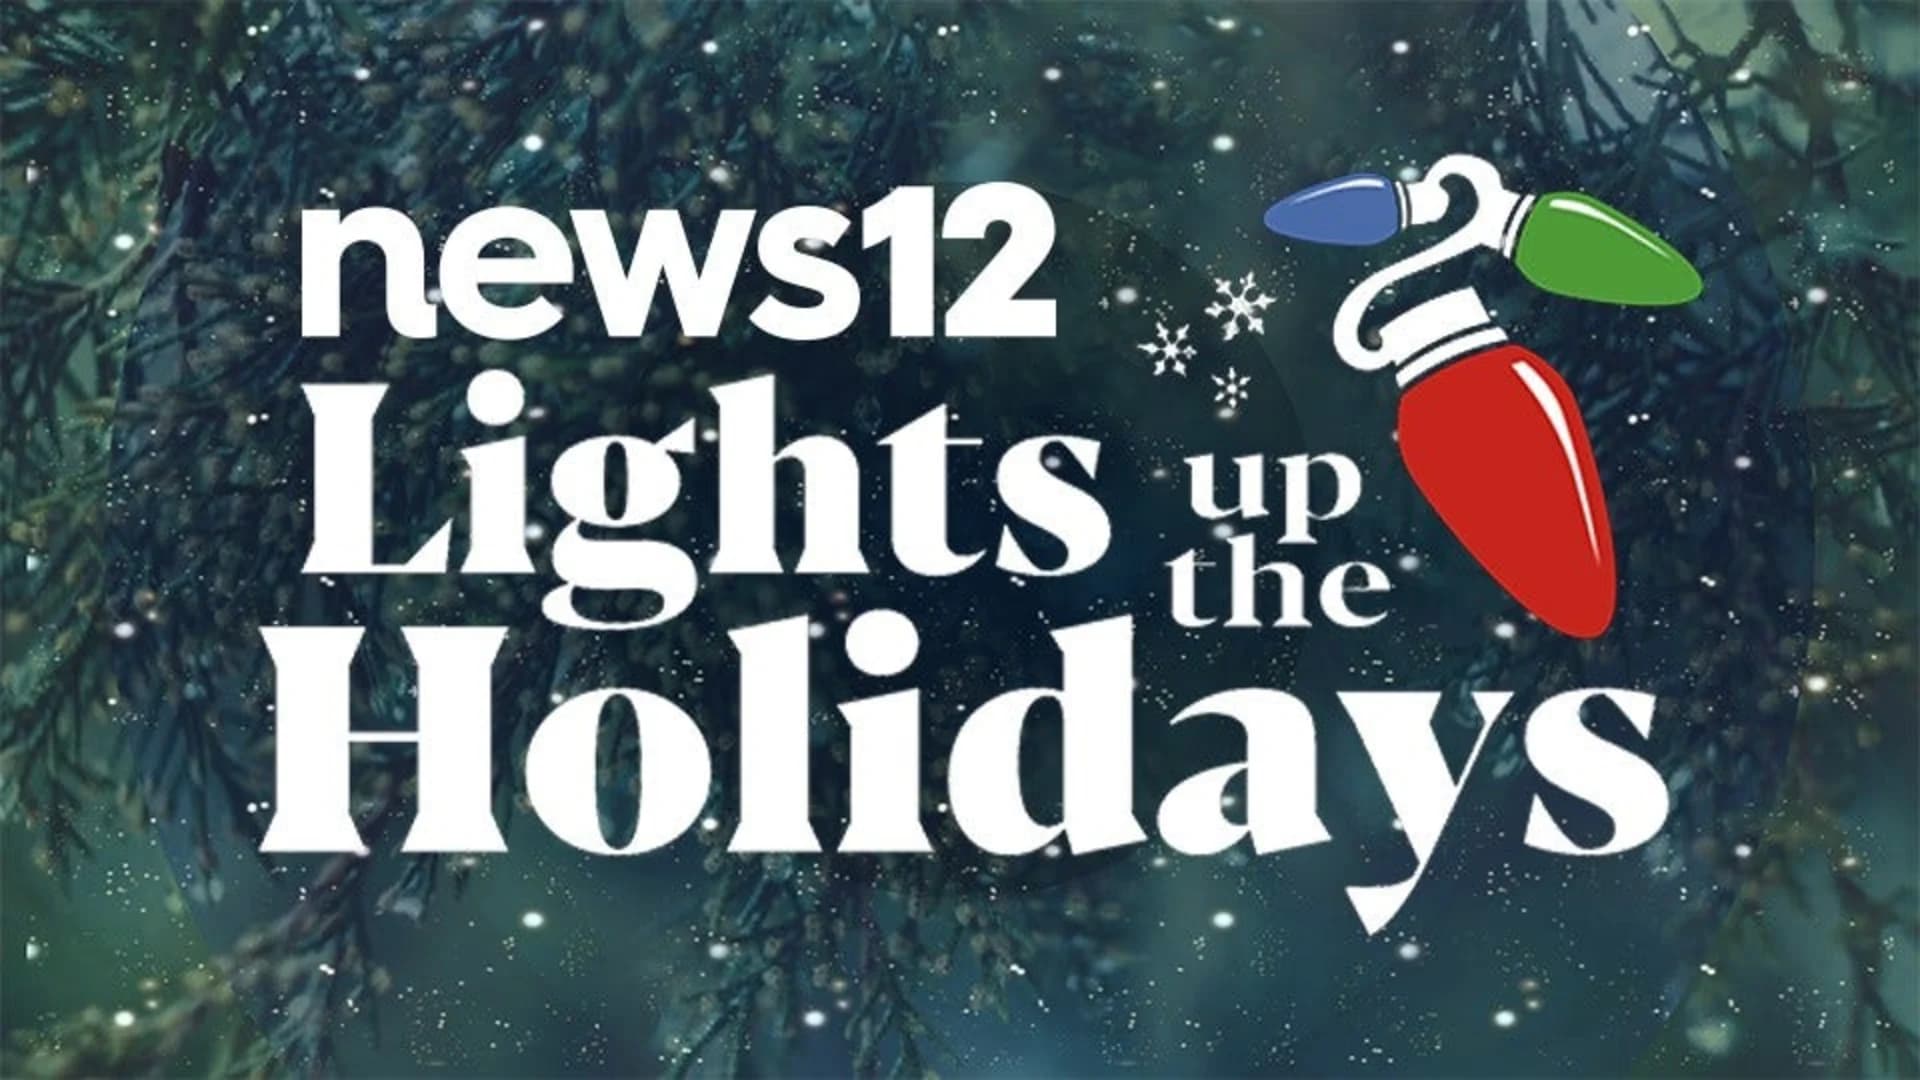 News 12 Lights Up the Holidays voting ends